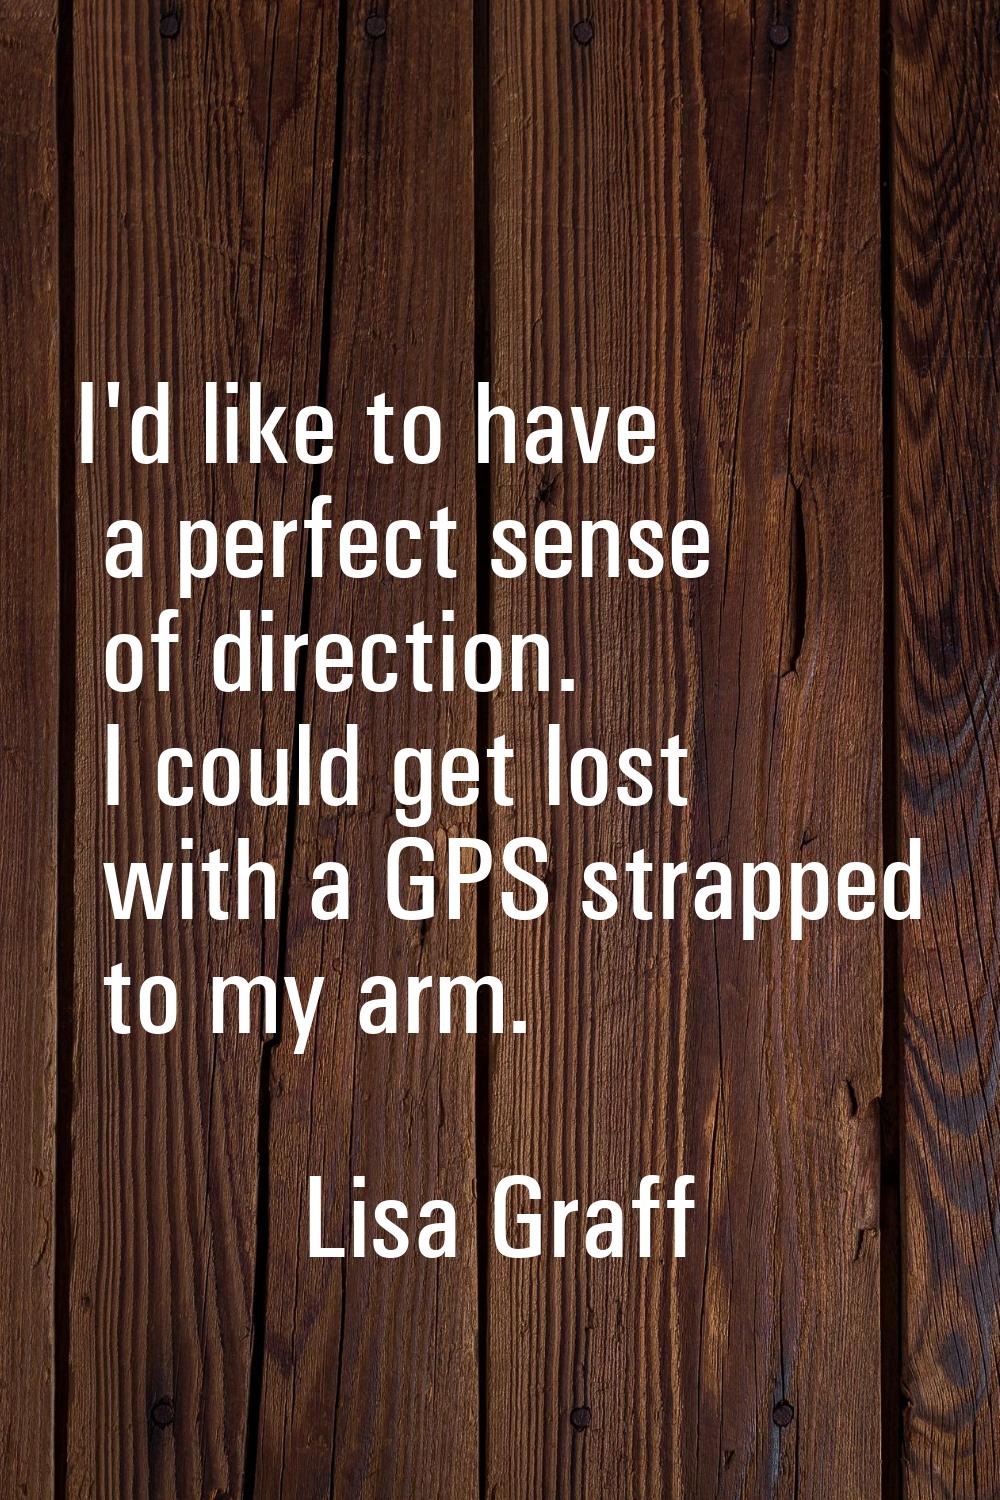 I'd like to have a perfect sense of direction. I could get lost with a GPS strapped to my arm.